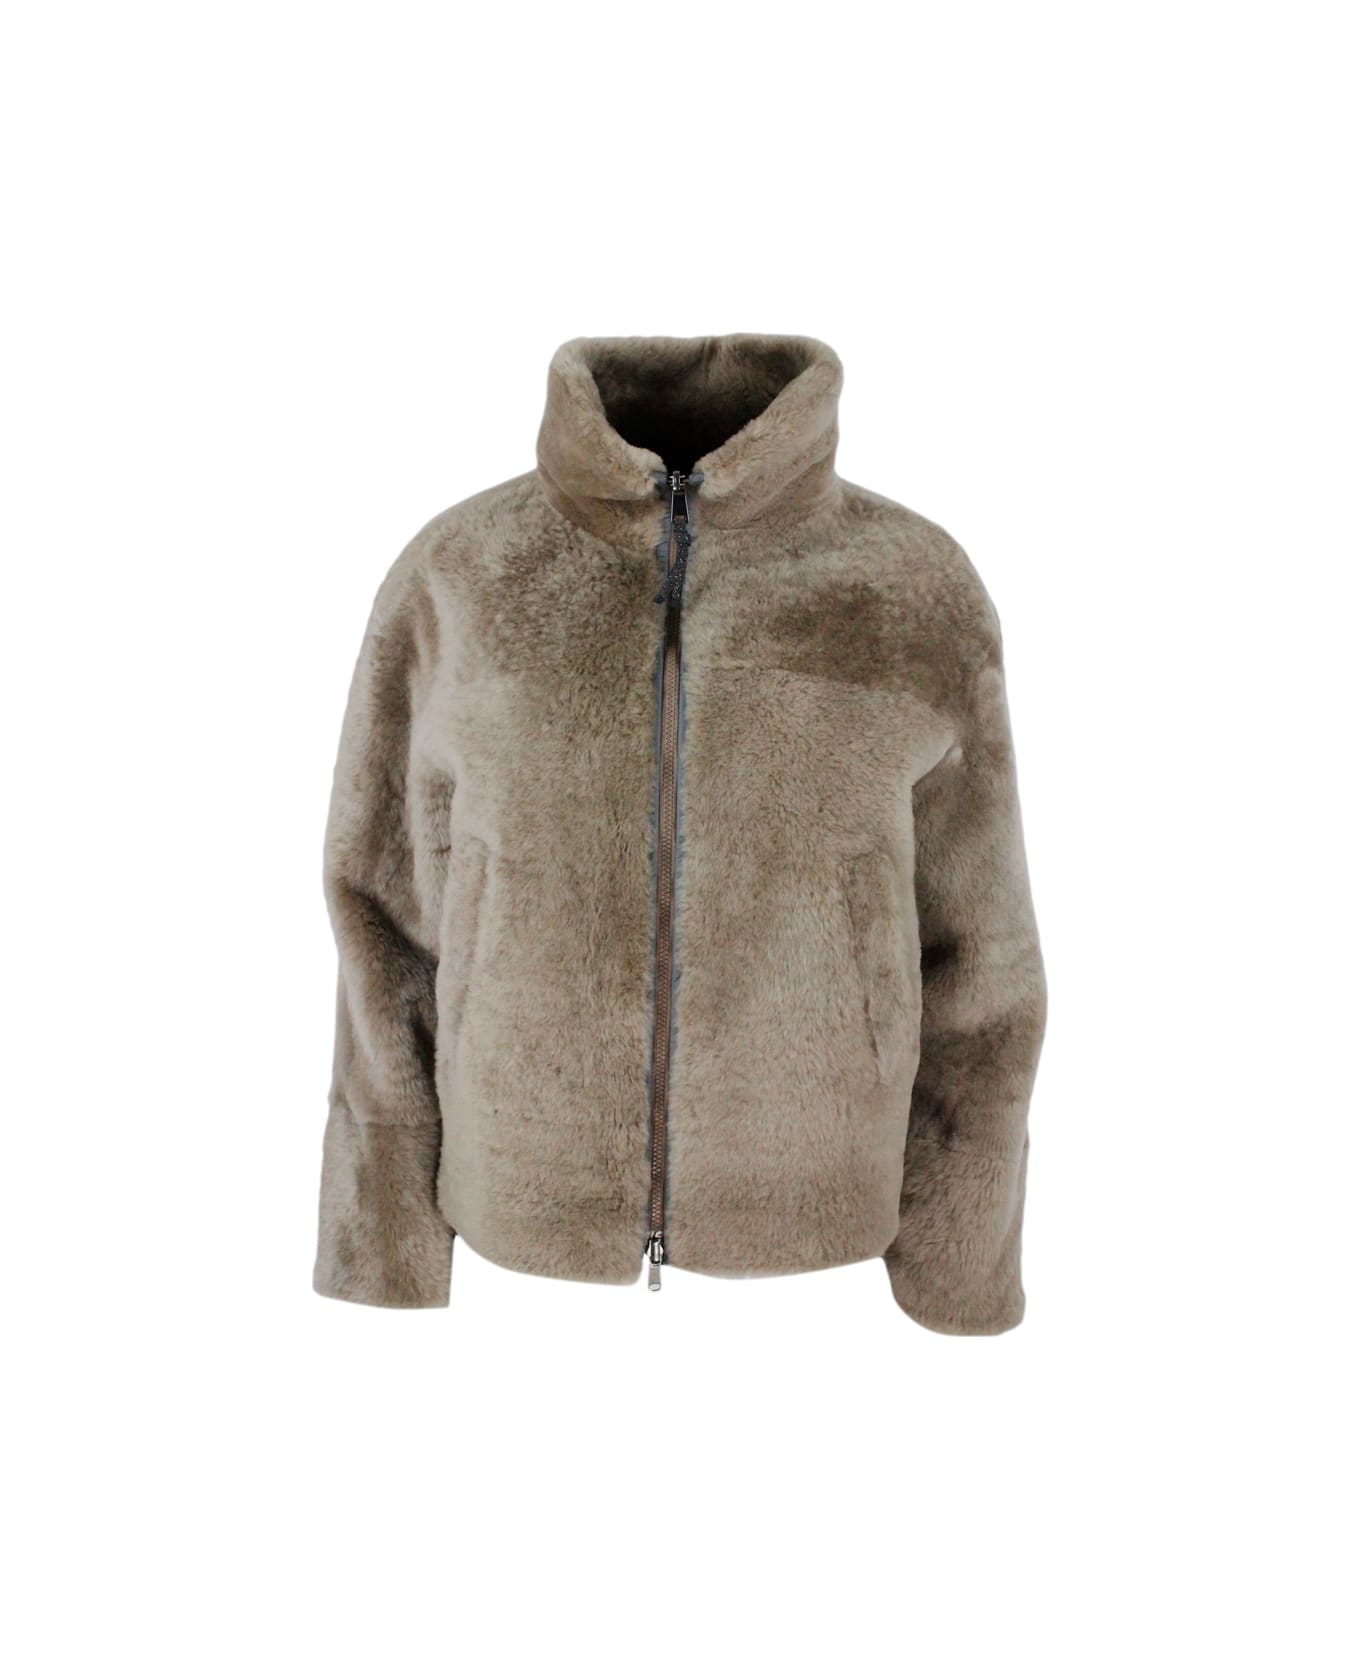 Brunello Cucinelli Reversible Jacket Jacket In Very Soft And Precious Shearling - Taupe